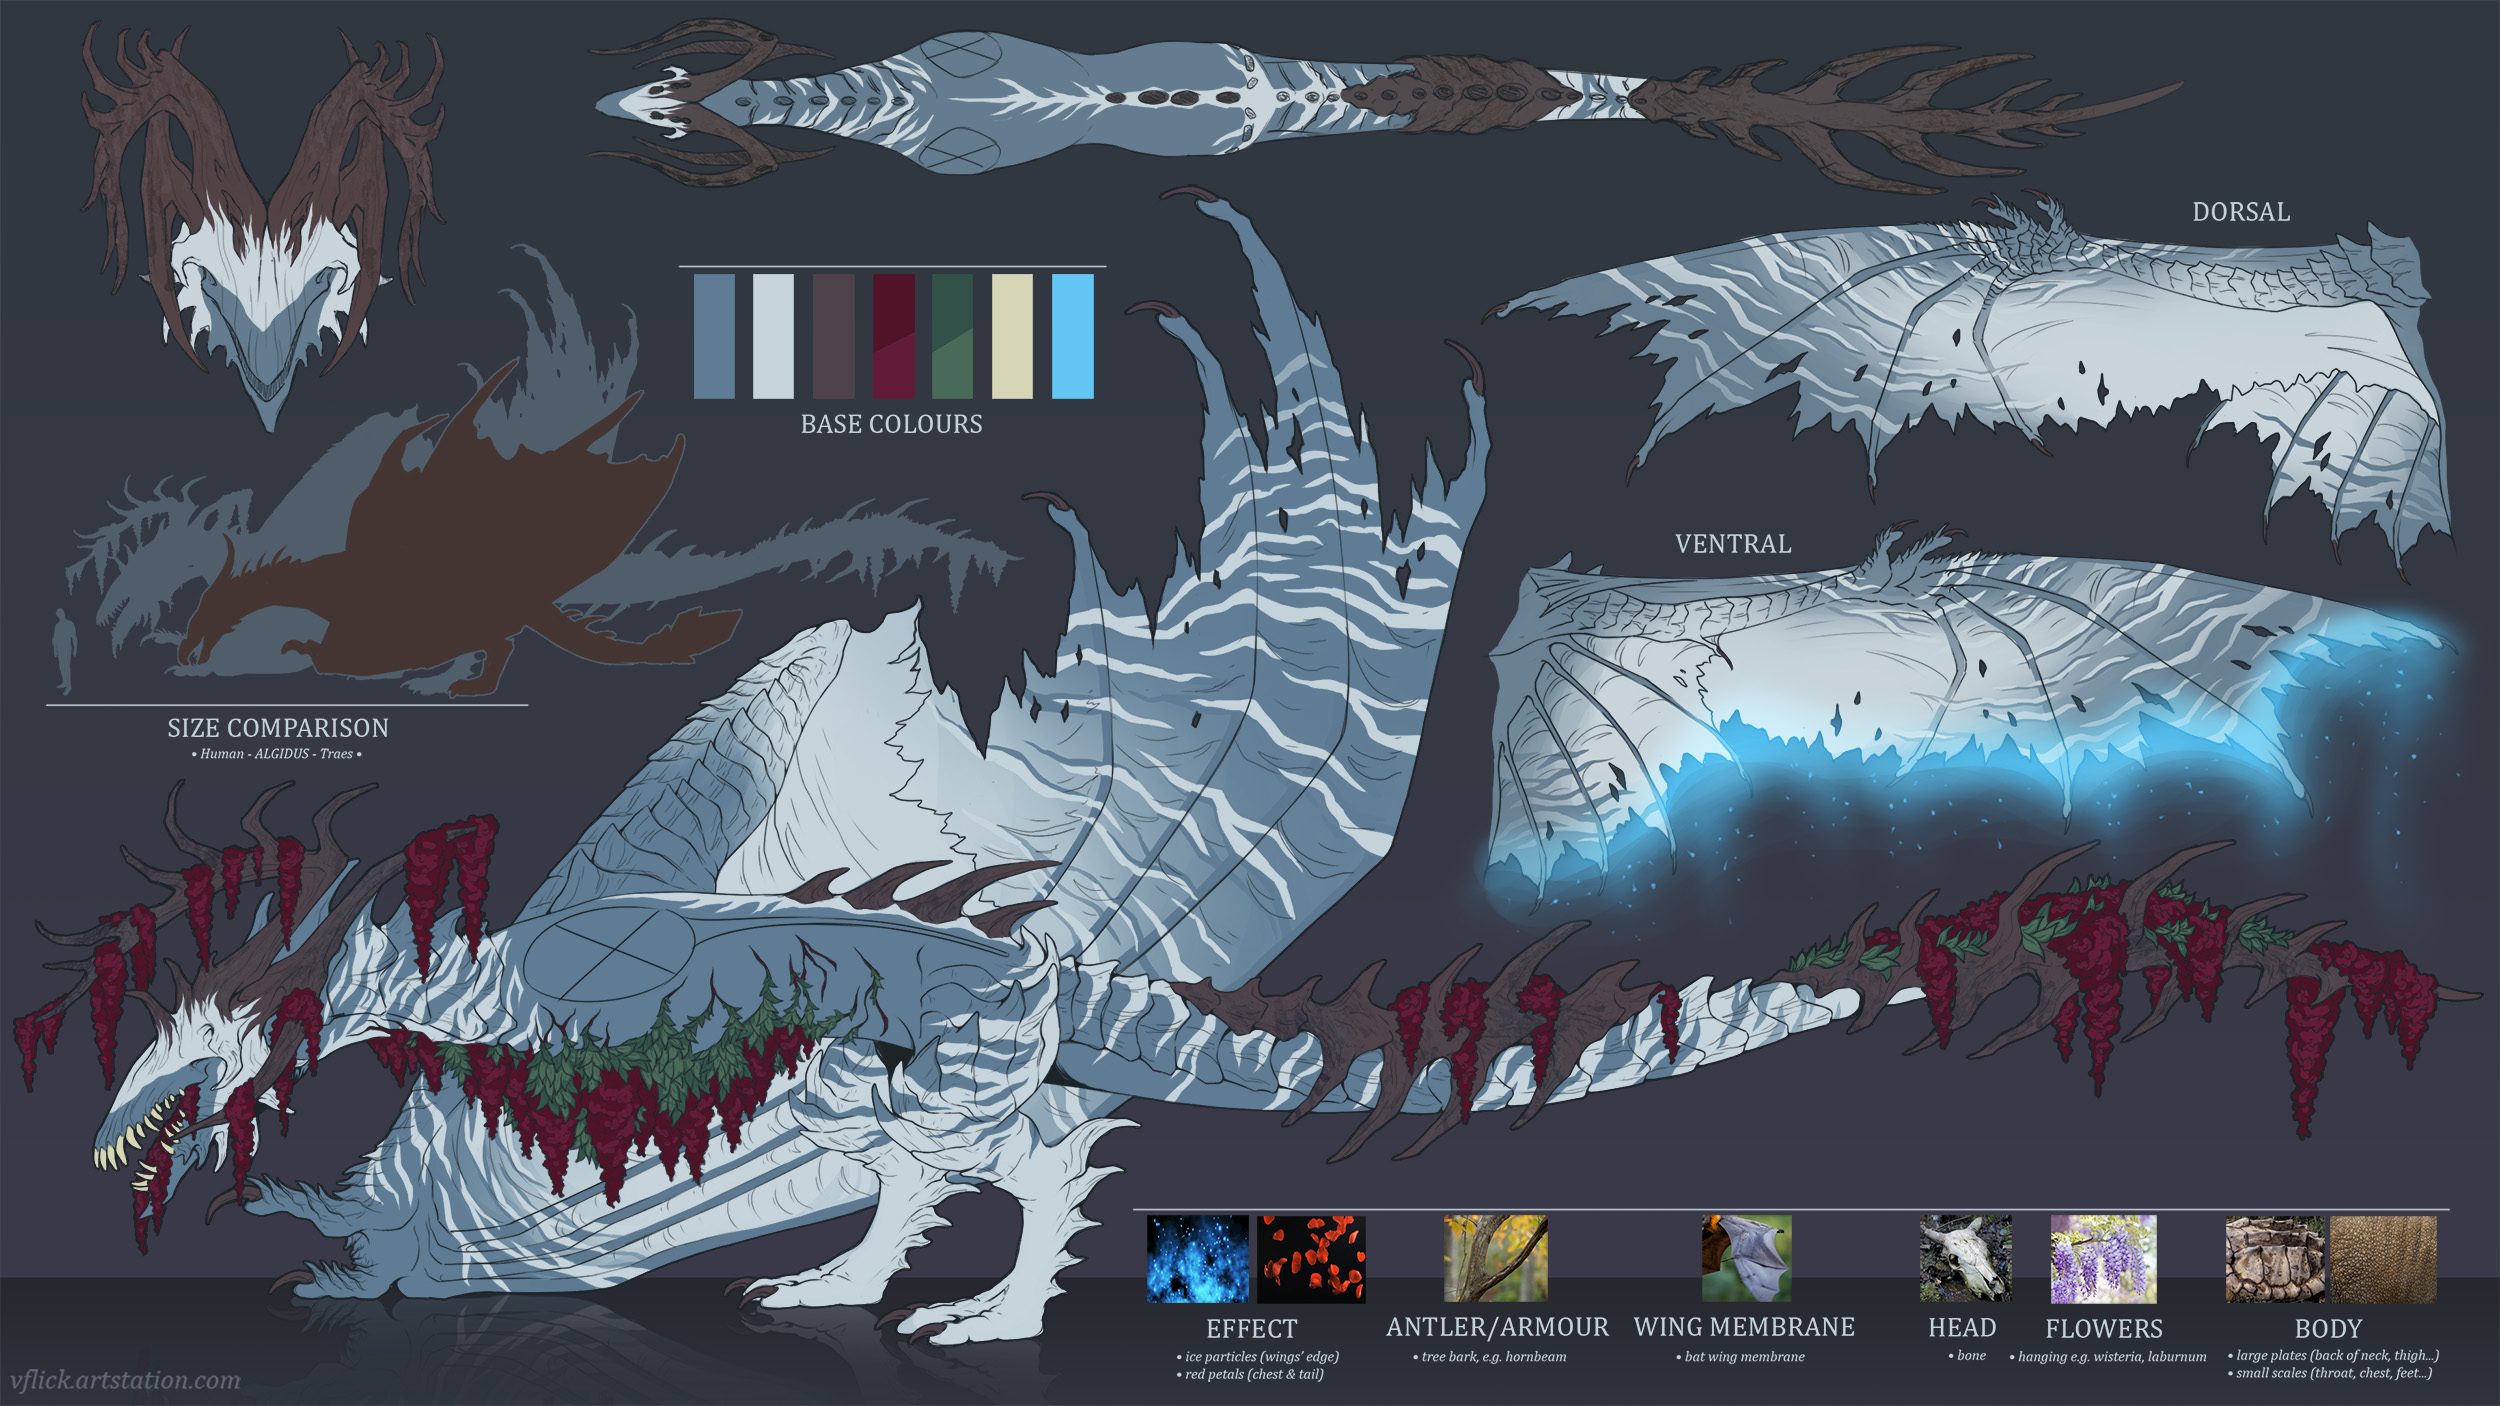 Character sheet depicting a dragon from various views. It is pale with natural markings, large antlers and lacks eyes and forelegs. It has red wisteria sprouting from its body.